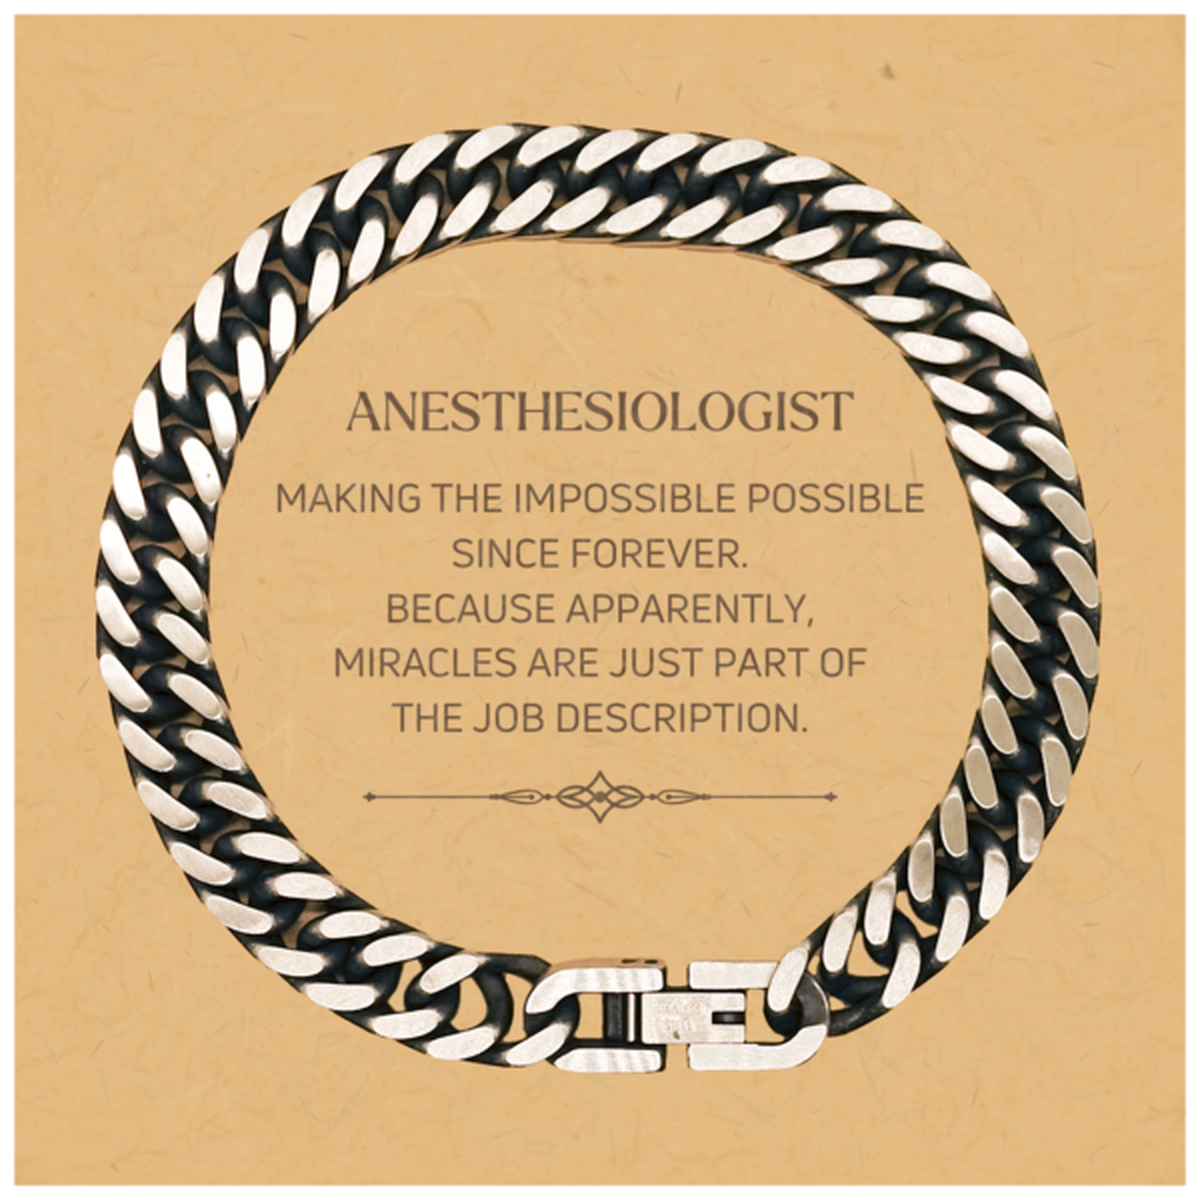 Funny Anesthesiologist Gifts, Miracles are just part of the job description, Inspirational Birthday Christmas Cuban Link Chain Bracelet For Anesthesiologist, Men, Women, Coworkers, Friends, Boss